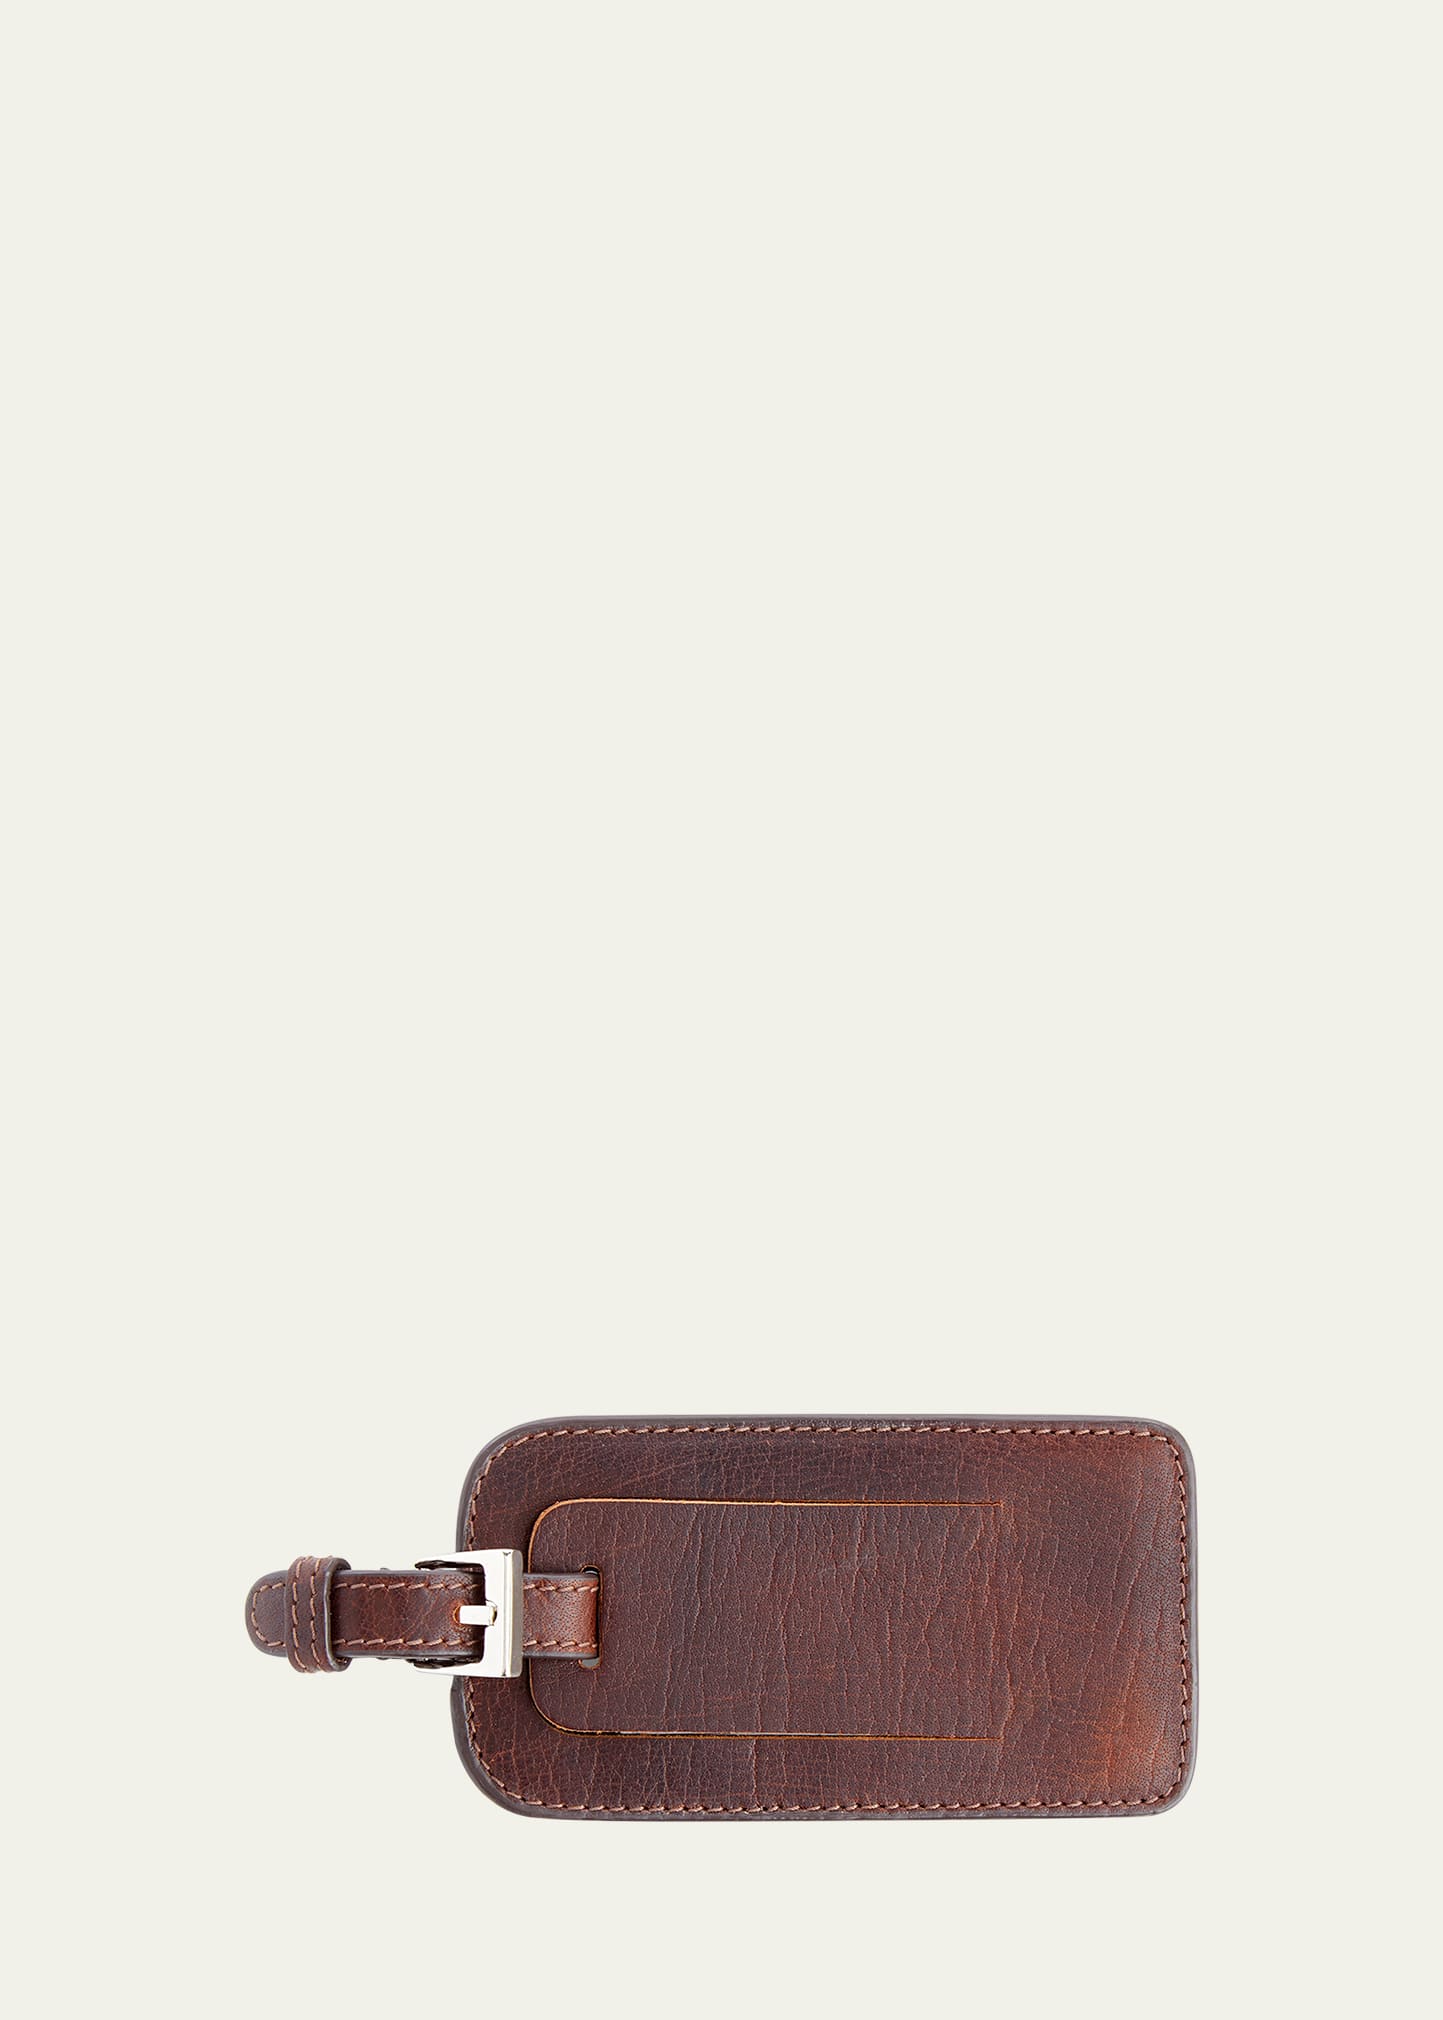 Royce New York Royce Leather Luggage Tag In Brown